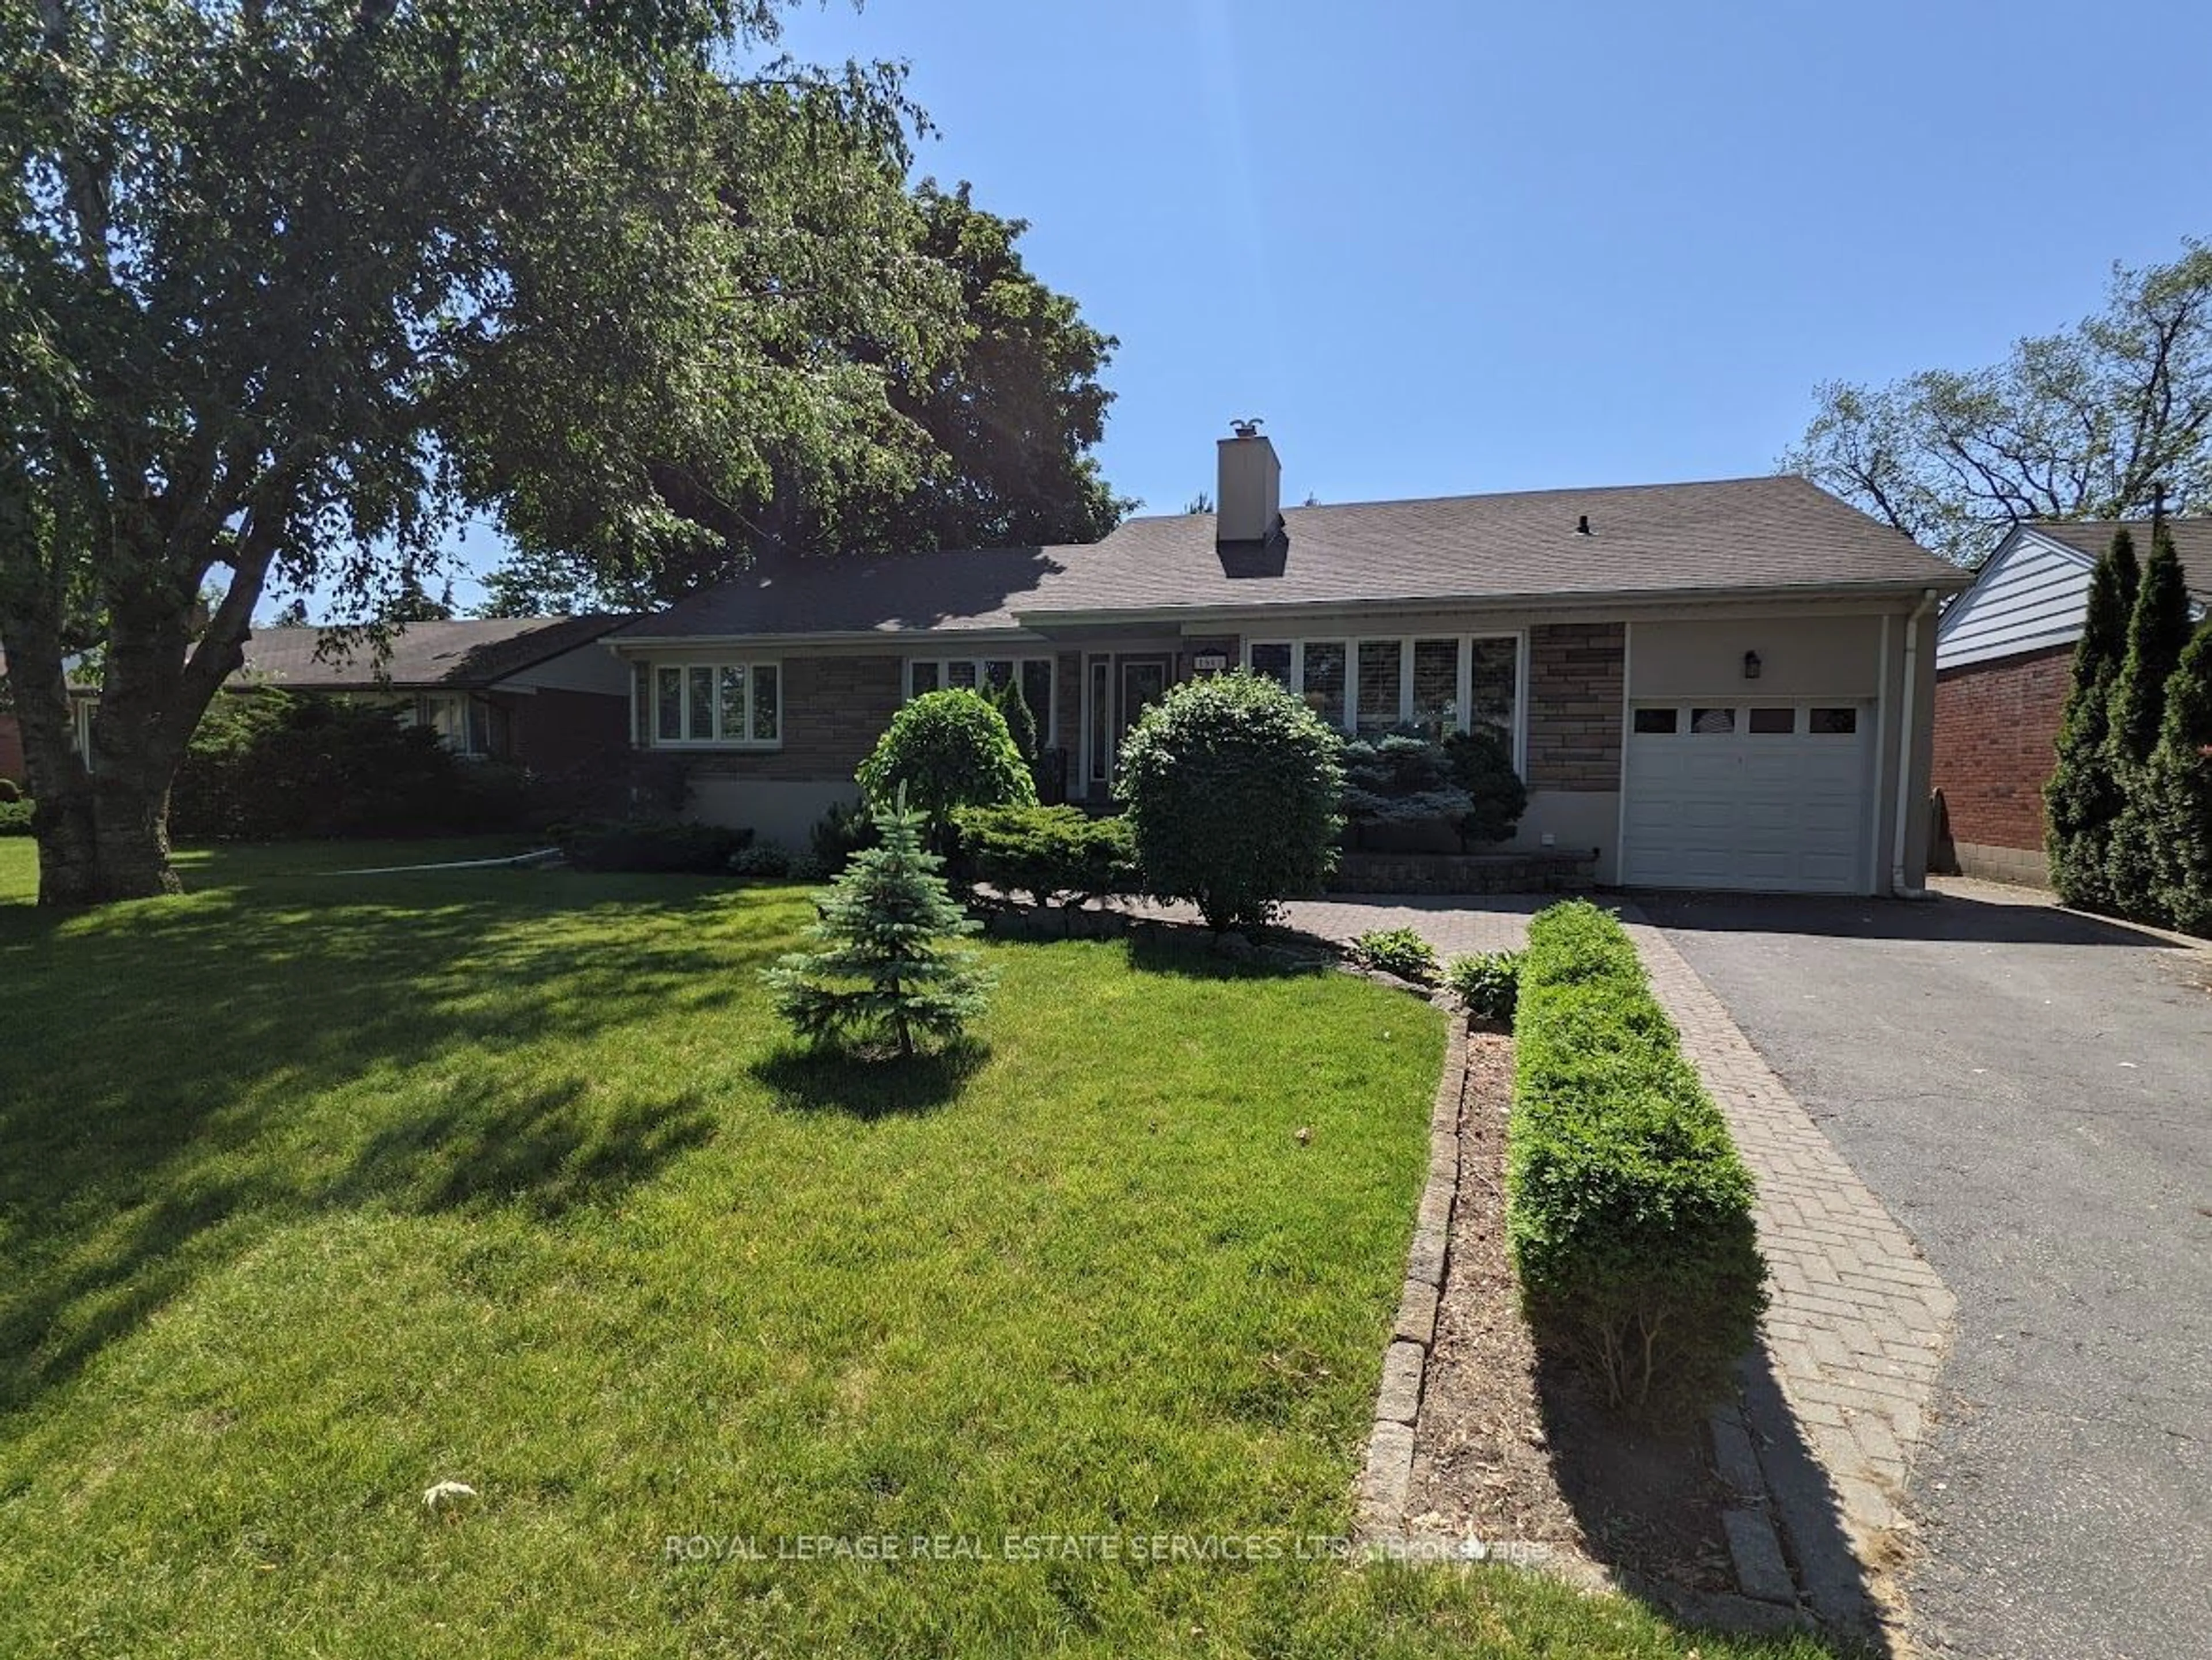 Frontside or backside of a home for 1602 Lincolnshire Blvd, Mississauga Ontario L5E 2S7